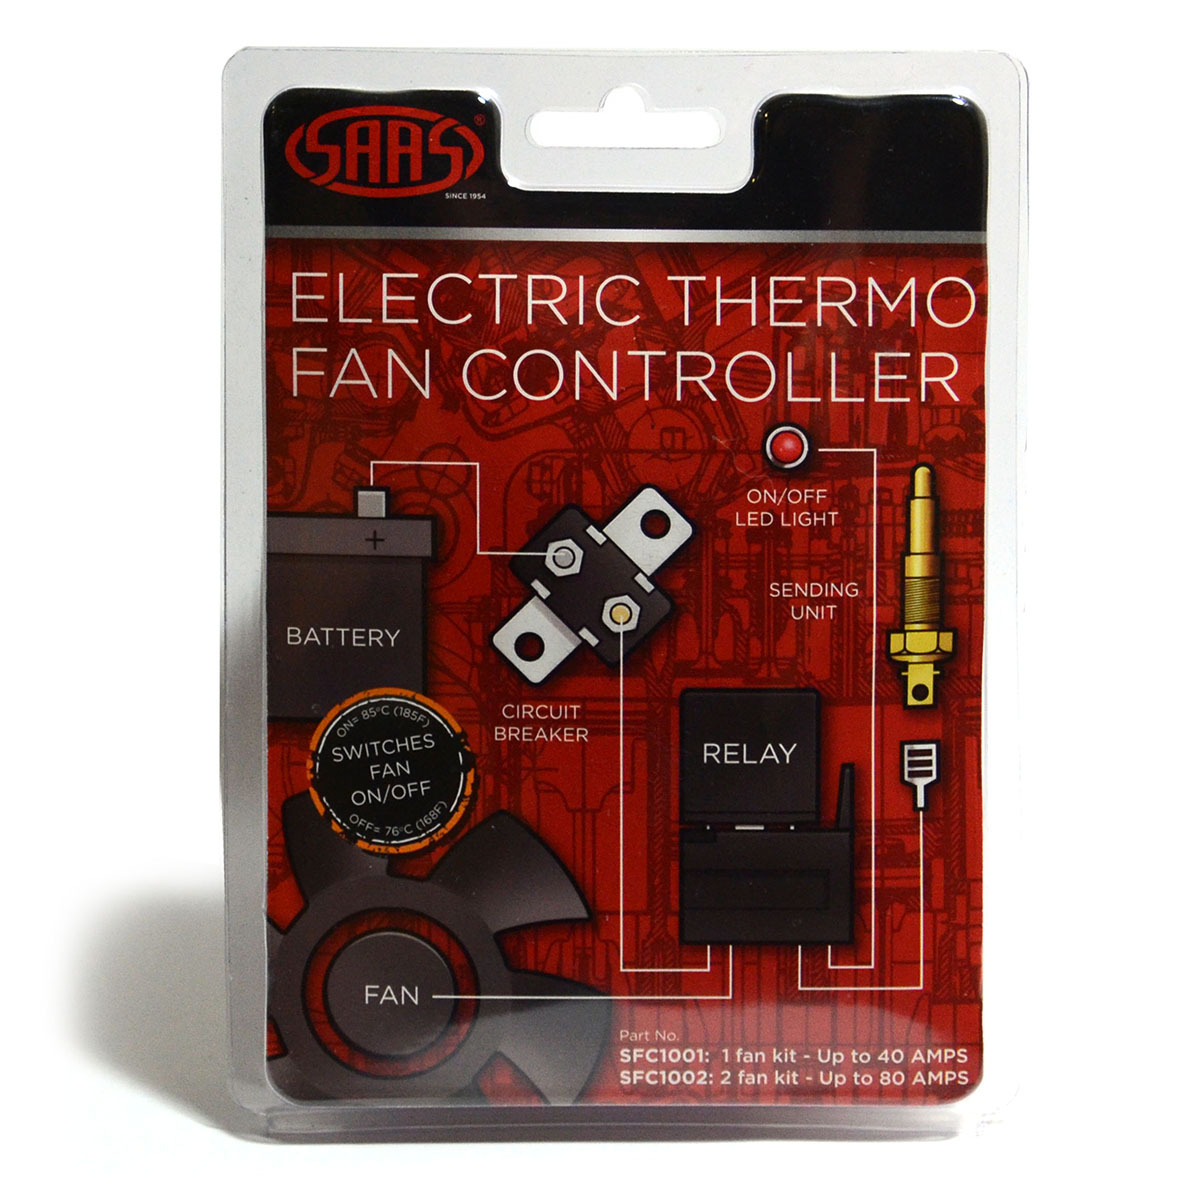 Electric Thermo Dual Fan Controller Kit on 85° C / off 76°C